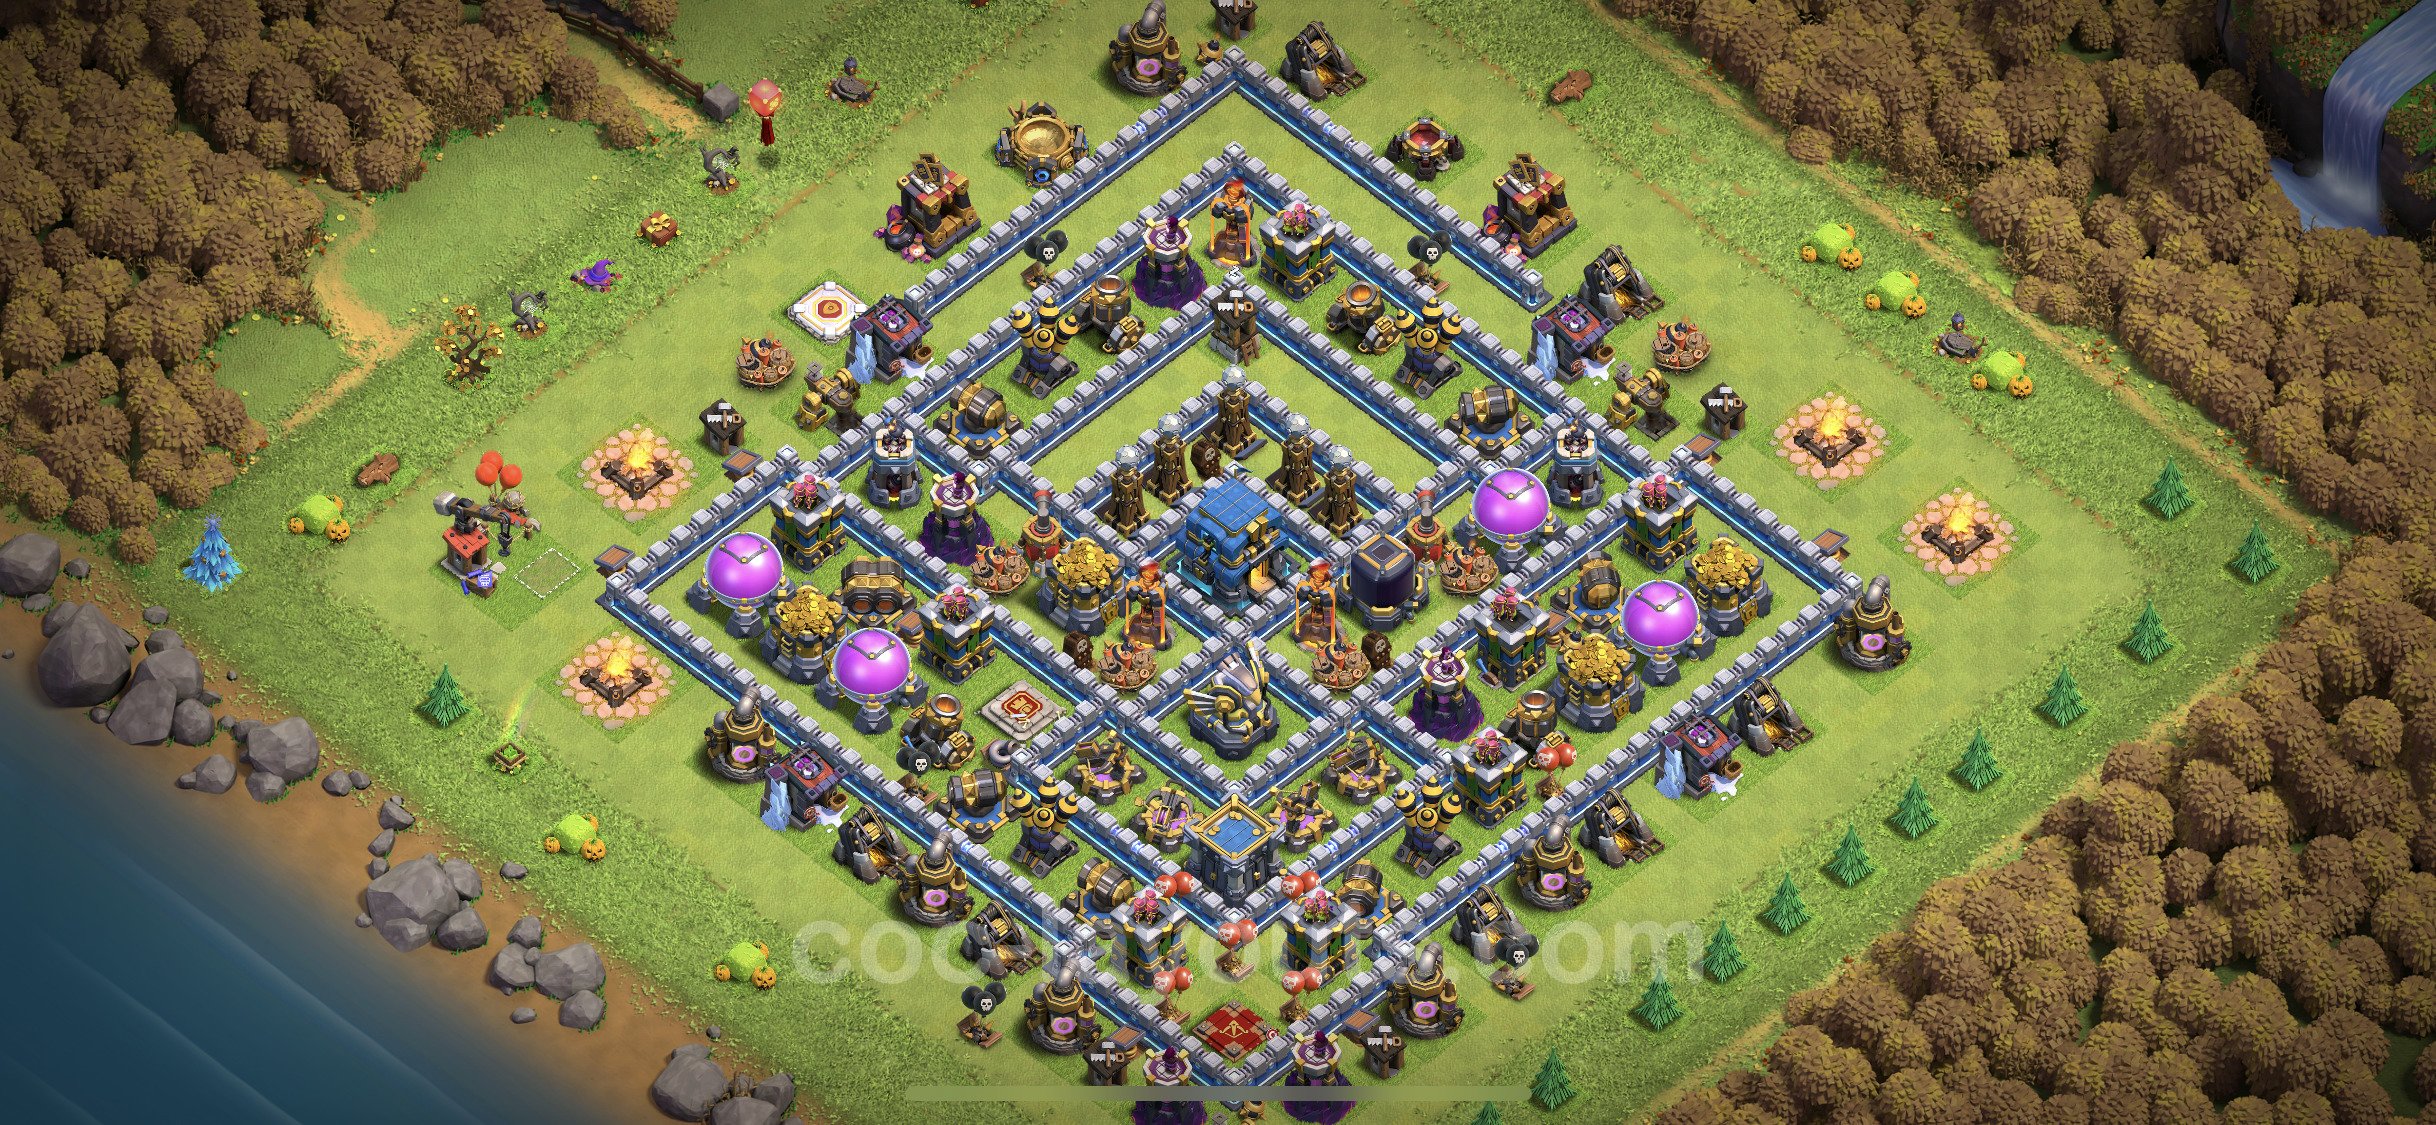 Farming Base TH12 Max Levels with Link, Hybrid, Anti 3 Stars Town